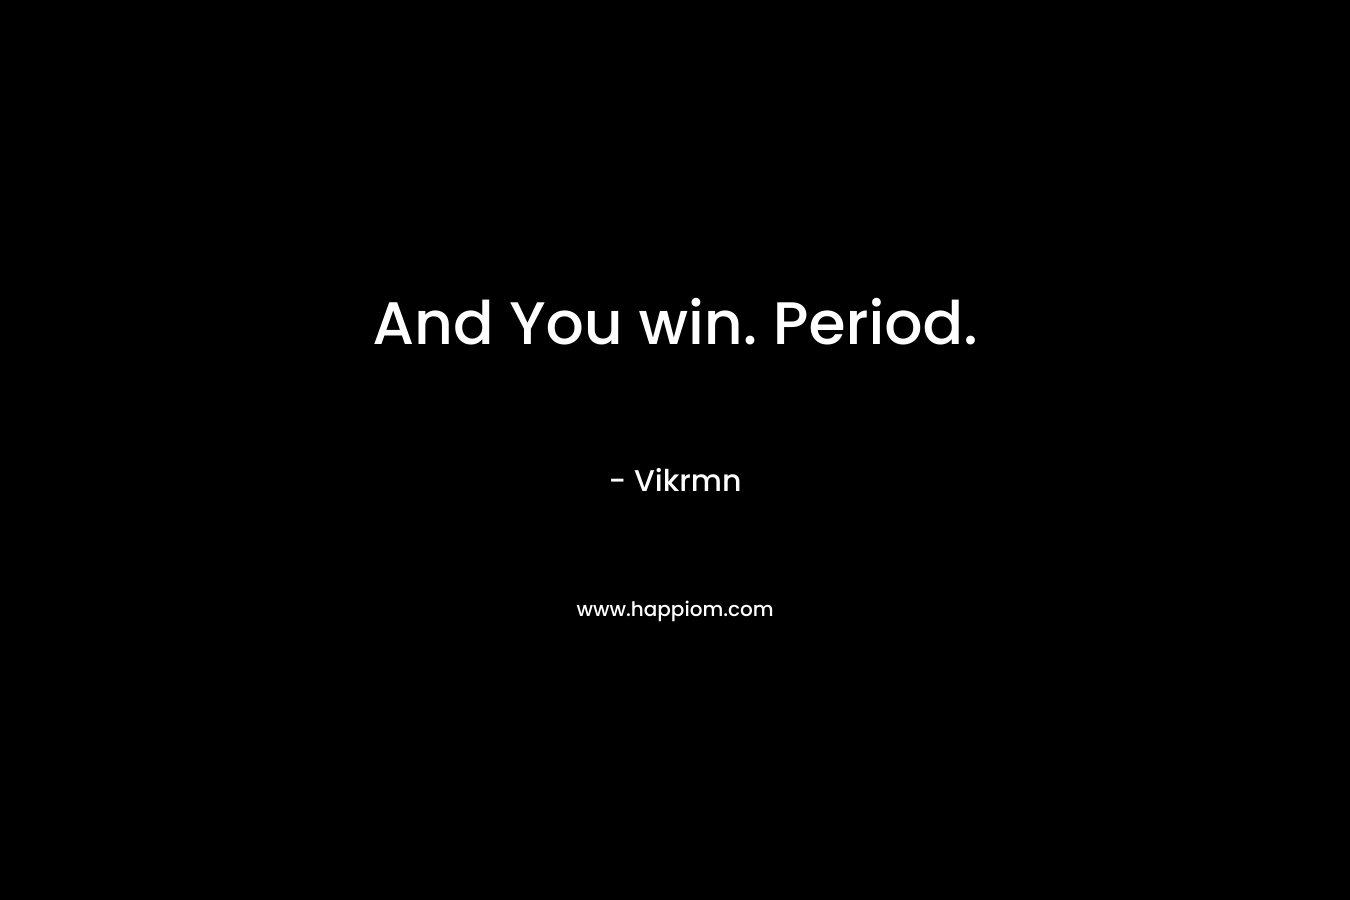 And You win. Period.